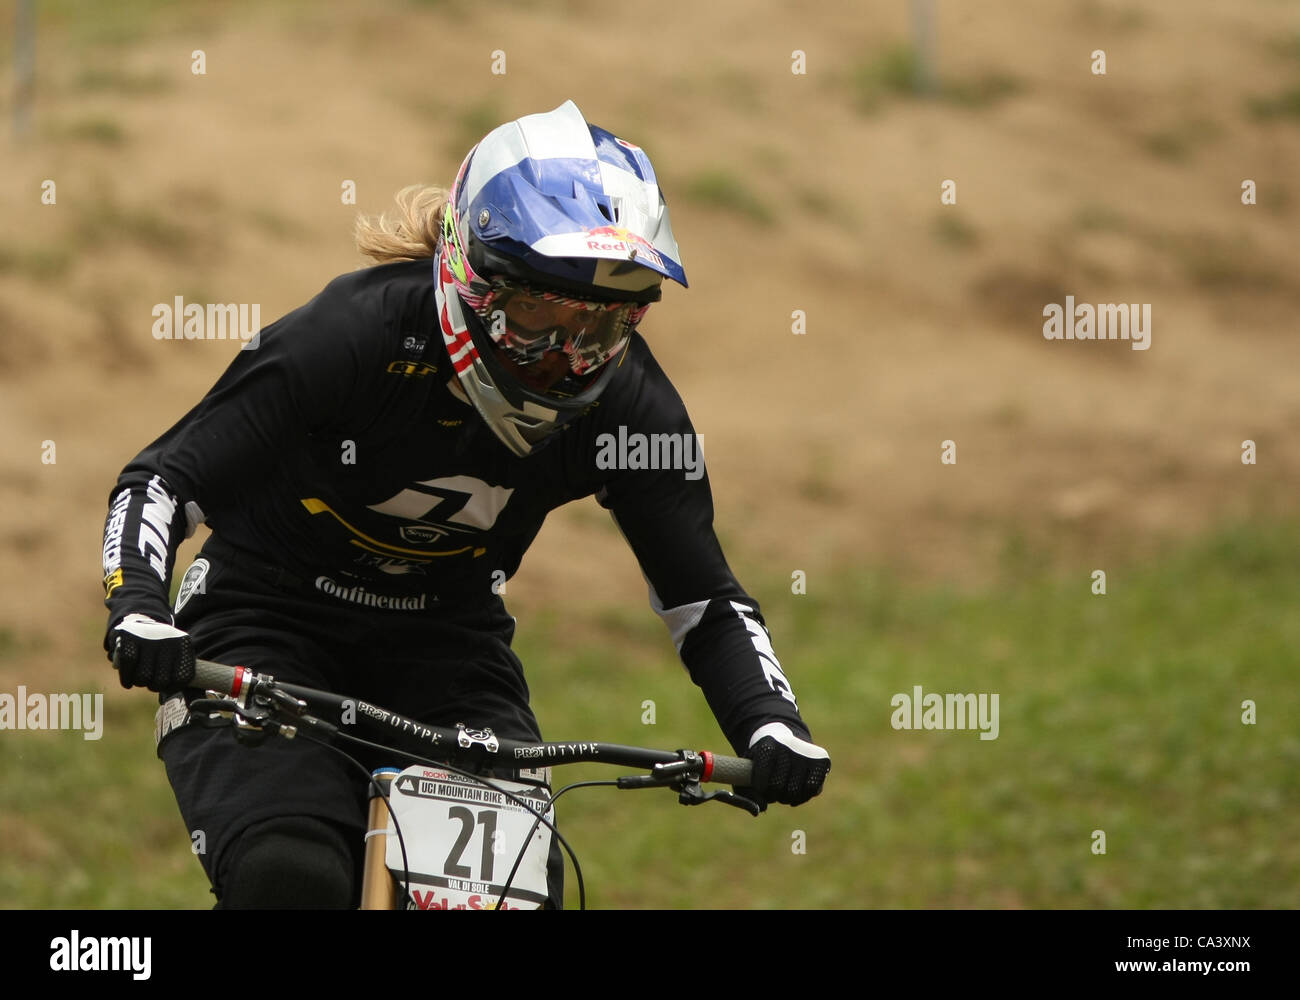 03.05.2012, Val Di Sole, Italy. Rachel ATHERTON (GBR) in action as she wins the competition during the 2012 UCI World Cup Mountain Bike Downhill, Val Di Sole Italy Stock Photo